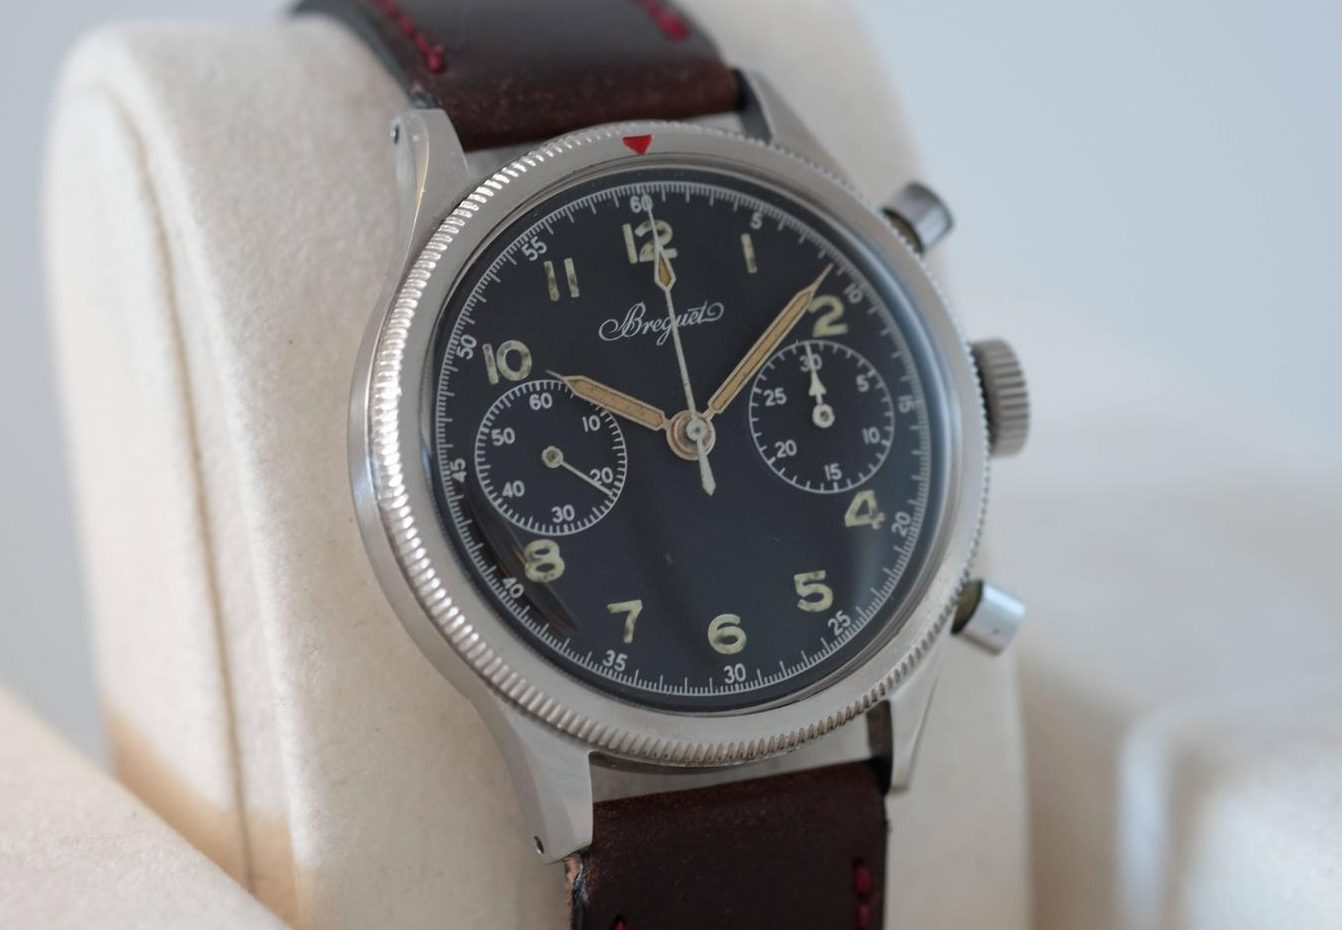 In 1954, Breguet was commissioned to produce Type 20 military chronographs for all branches of the French military: Armée de l’air (Air Force), Marine Nationale (Naval Army) and Centre d’essais en vol (Flight Tests Center) or CEV. 